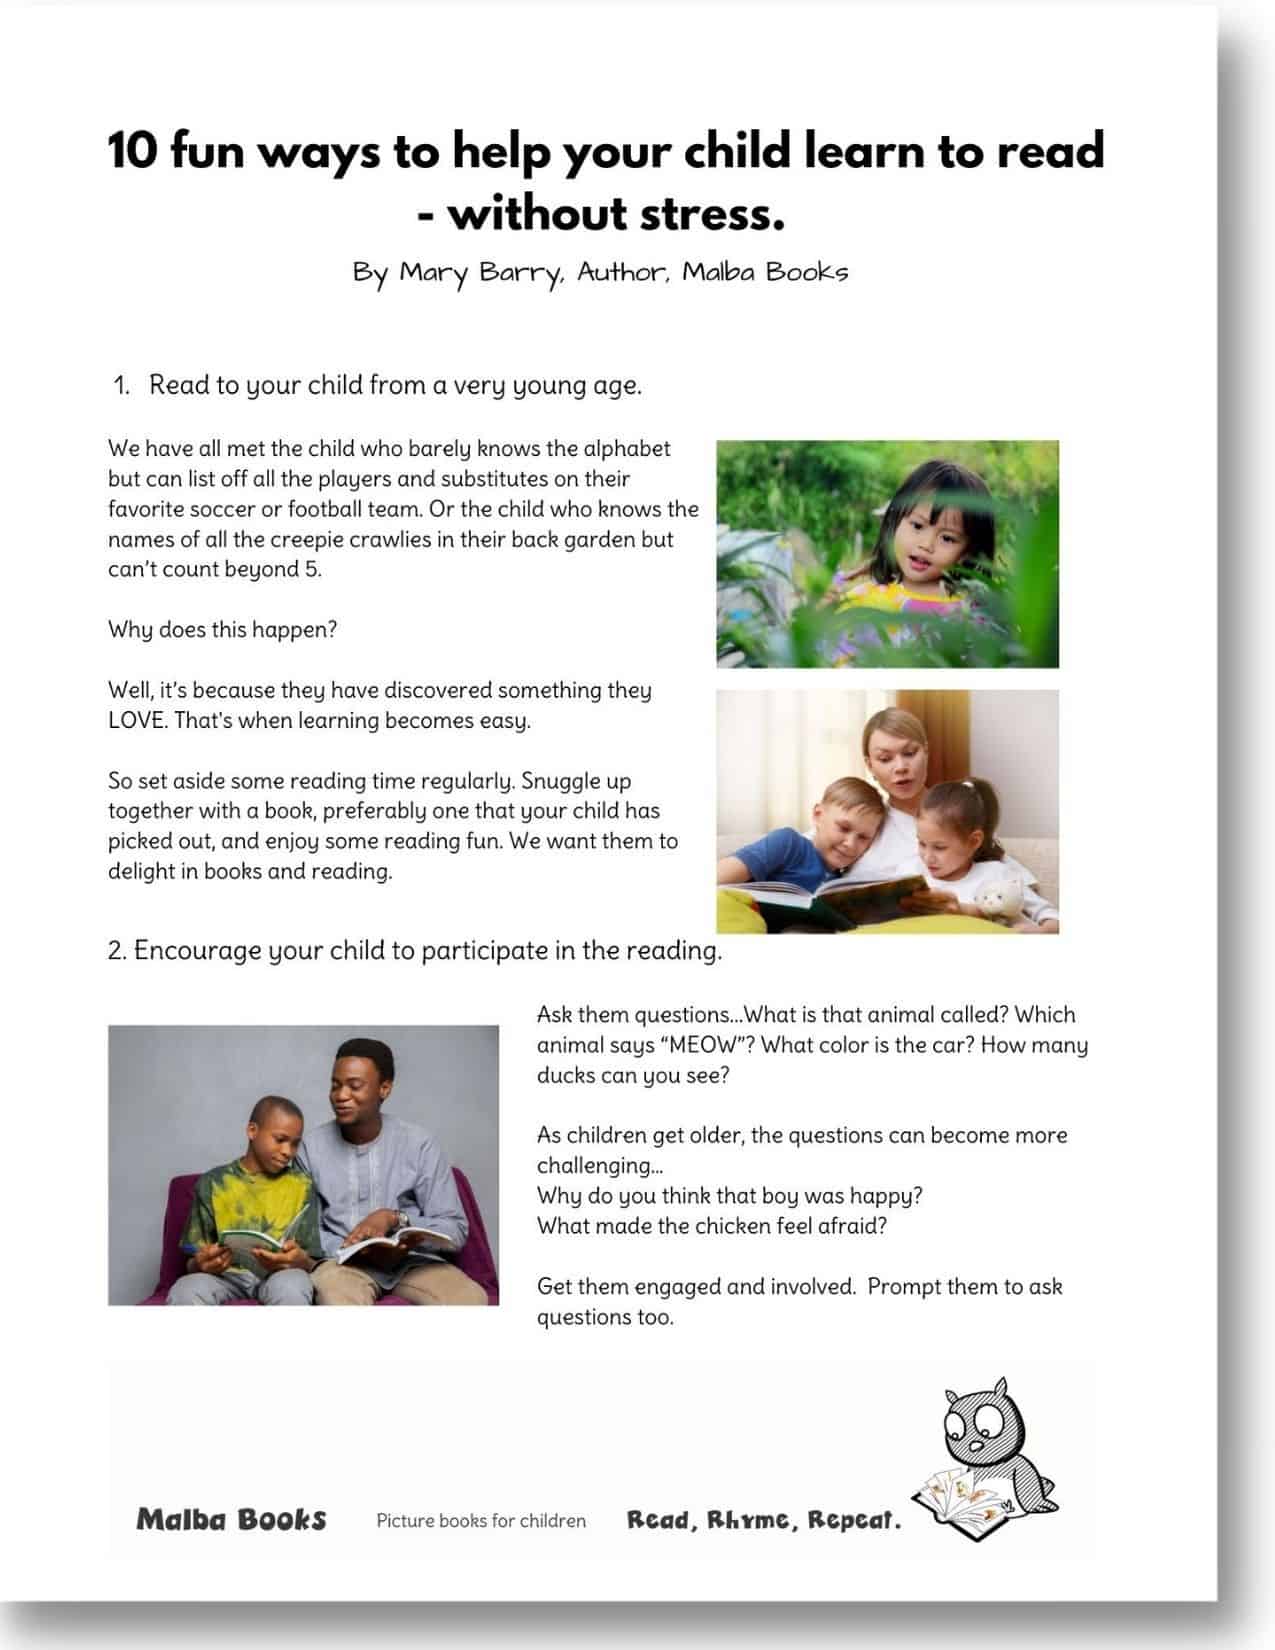 Shows first 2 of the 10 ways to help your child learn to read - without fuss. Images include mother and 2 children reading and father and boy reading. 3rd image is a small girl looking at bug on plant.